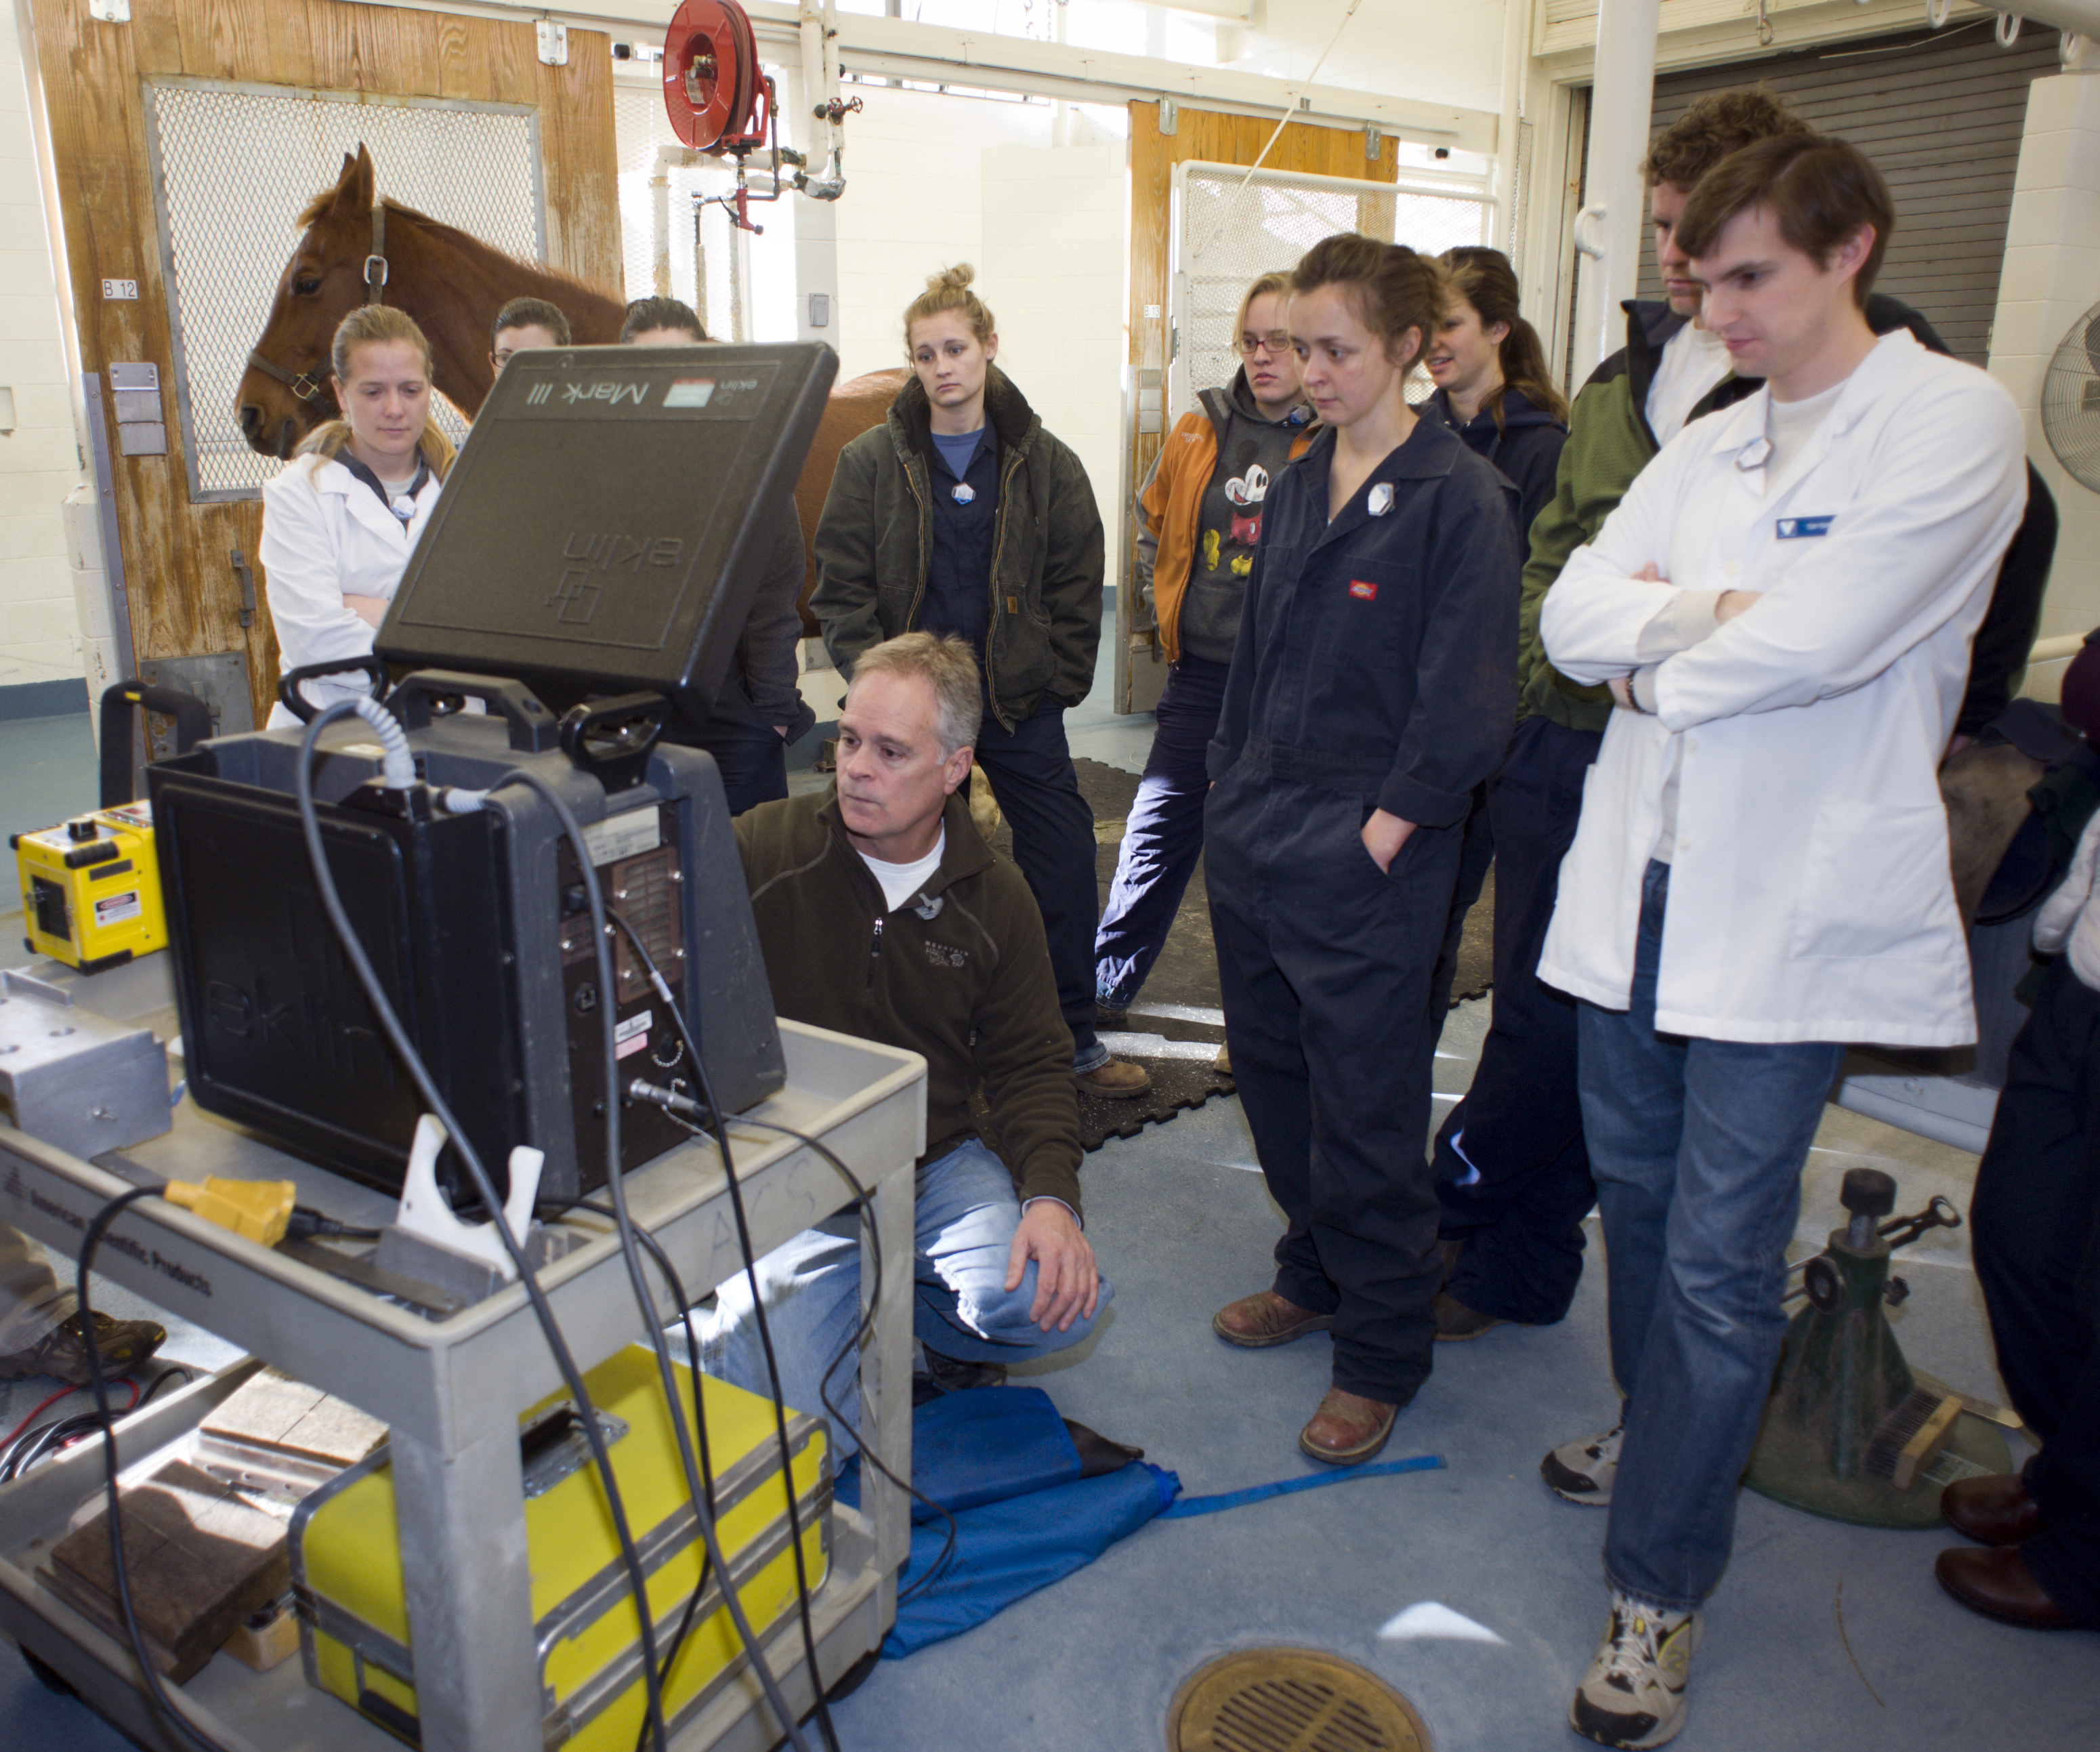 Members of the Equine Field Service team use the latest technology in diagnosis and treatment of horses.